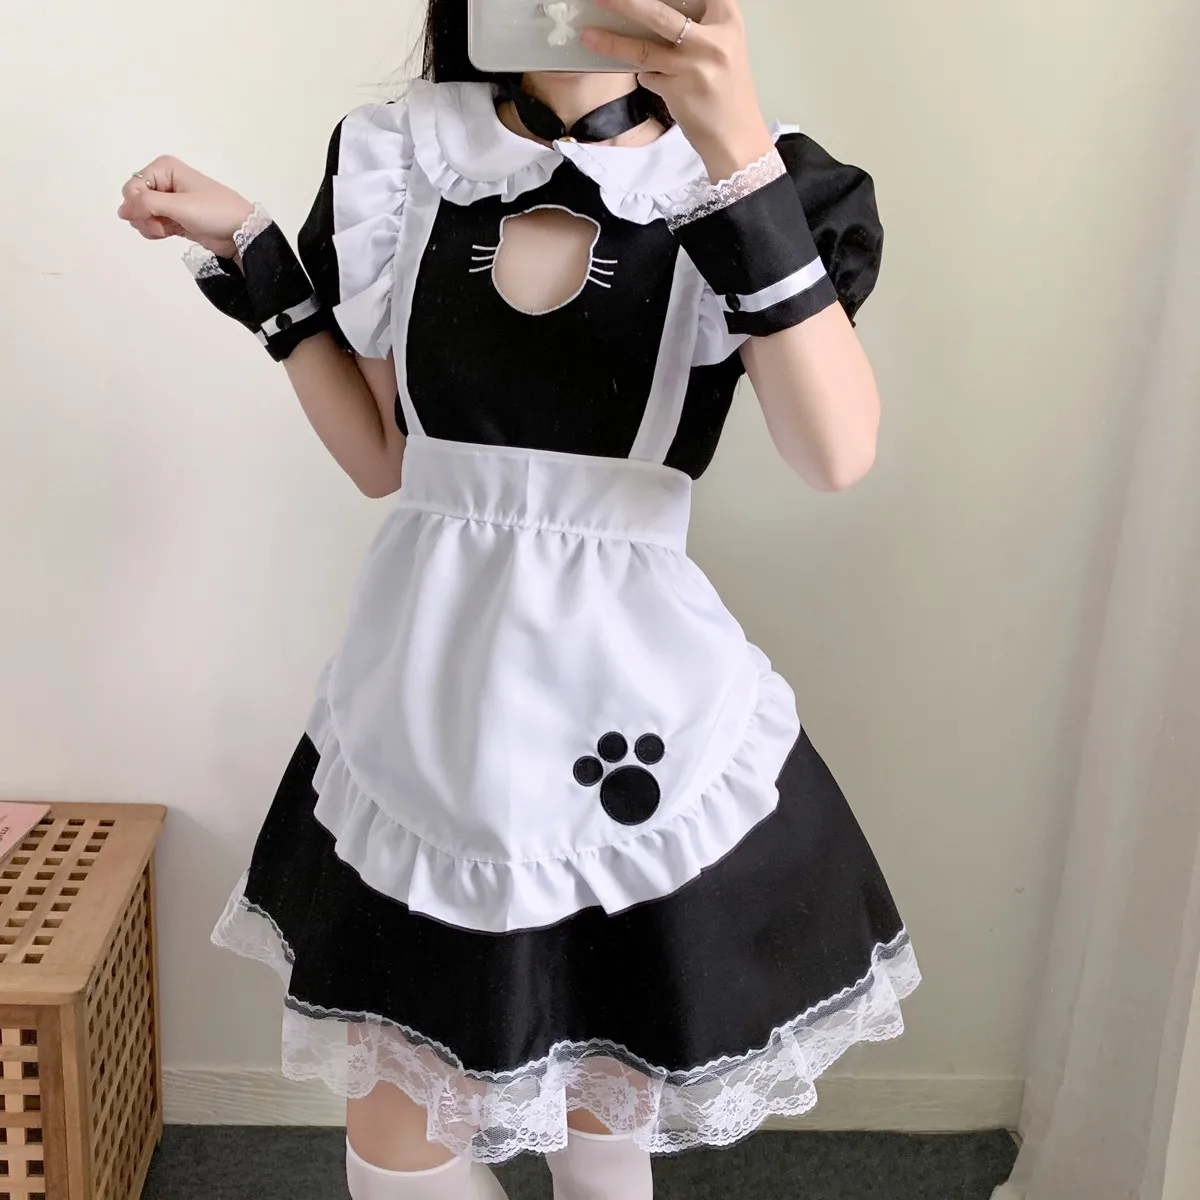 pirate costume women Women Lovely Maid Cosplay Costume Short Sleeve Retro Maid Lolita Dress Cute Japanese French Outfit Cosplay Costume Plus Size 3XL halloween outfits Cosplay Costumes